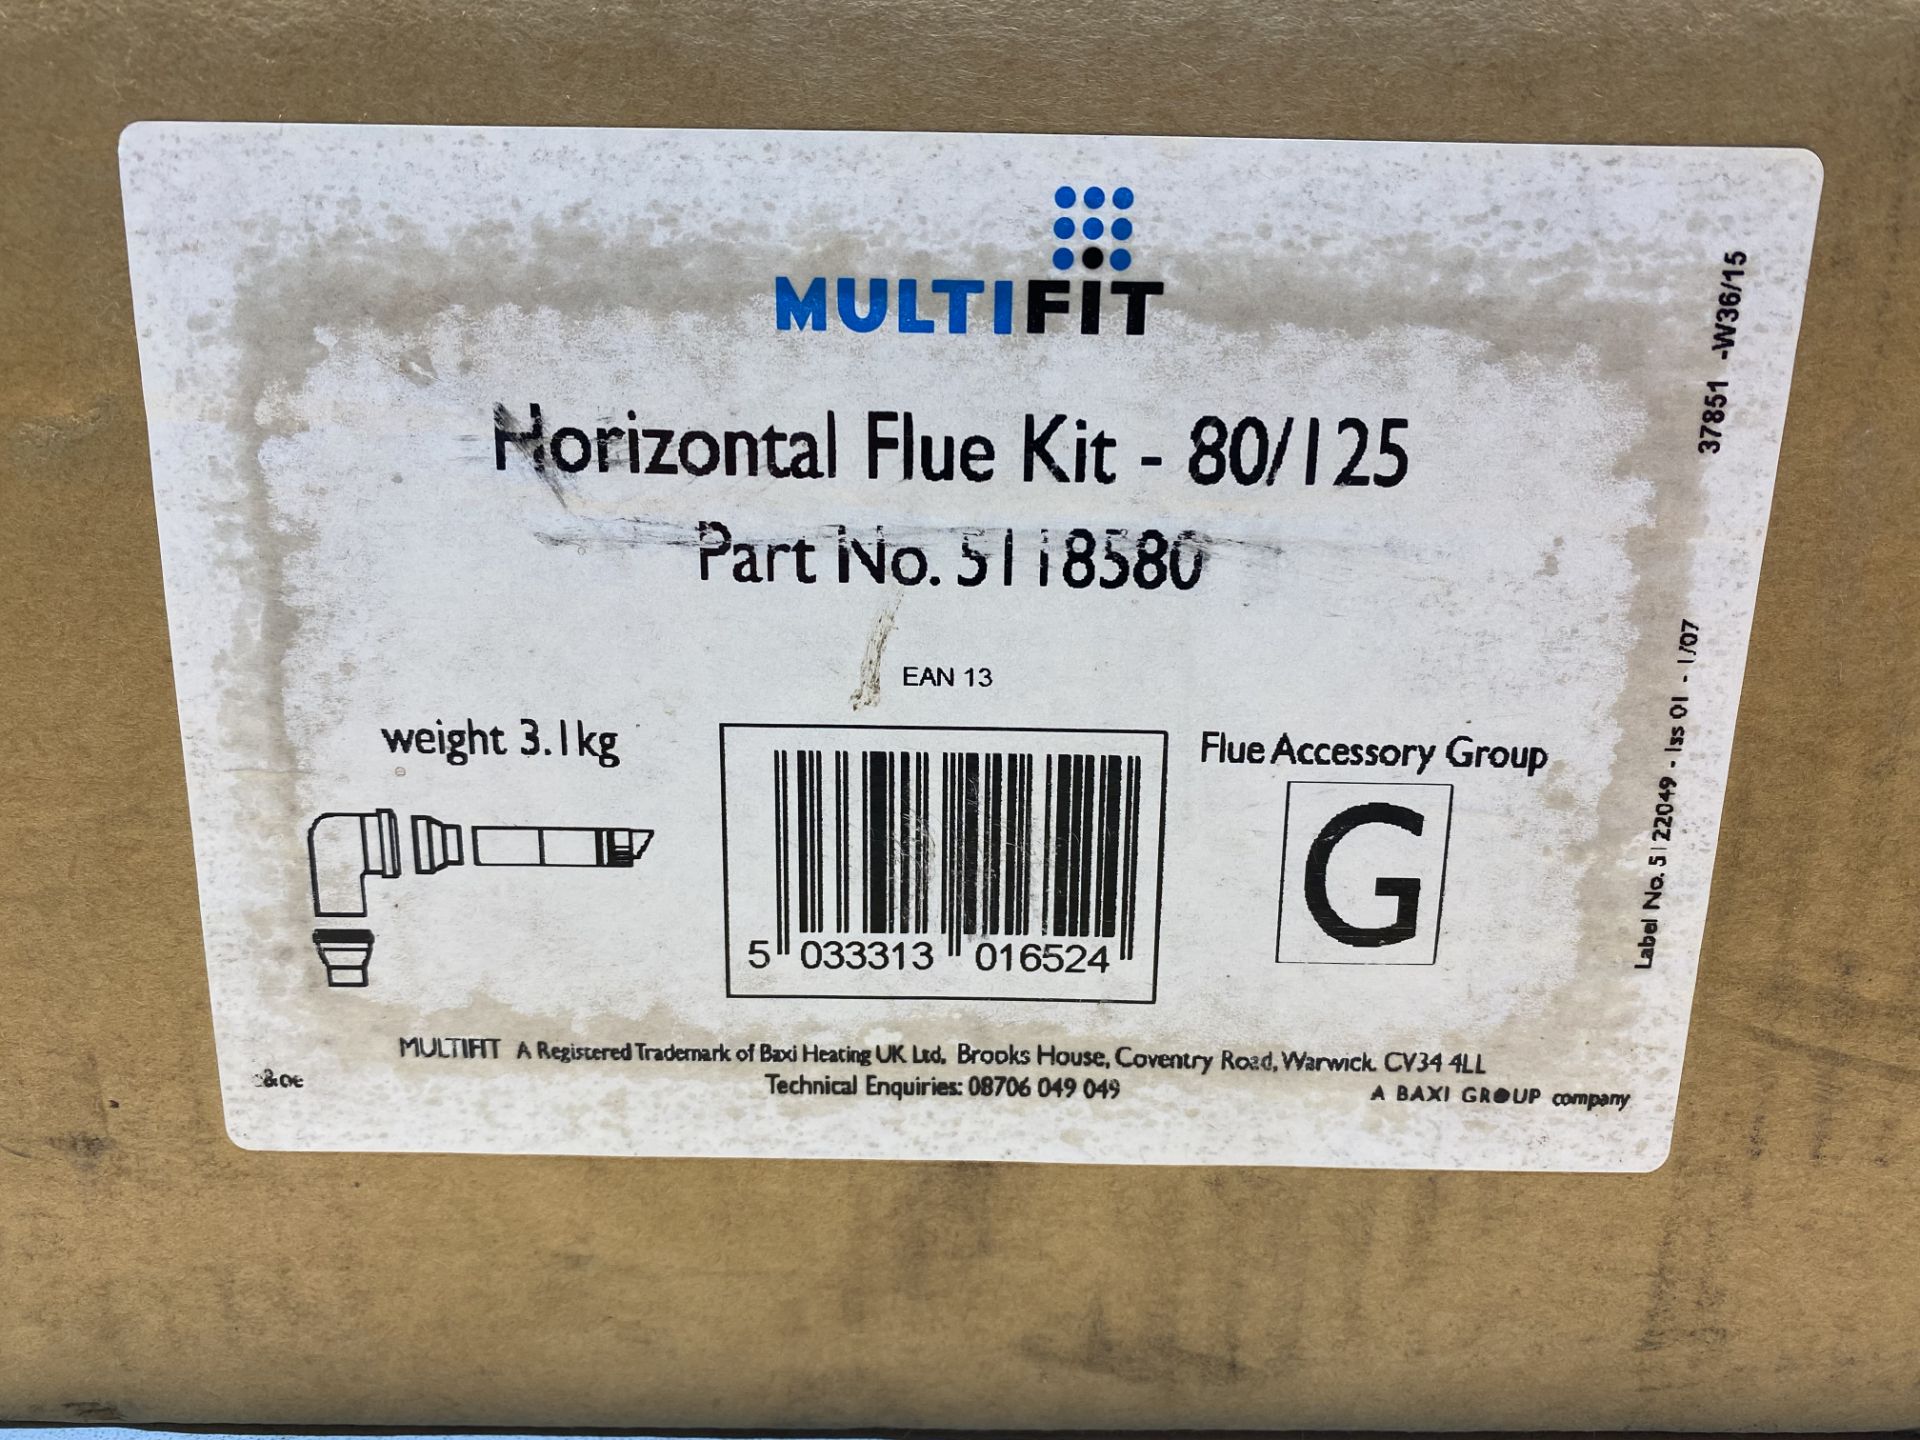 10 x Baxi Multifit 5118580 Group G Horizontal Flue Kit | Missing Main Flue As seen In Pictures - Image 3 of 3